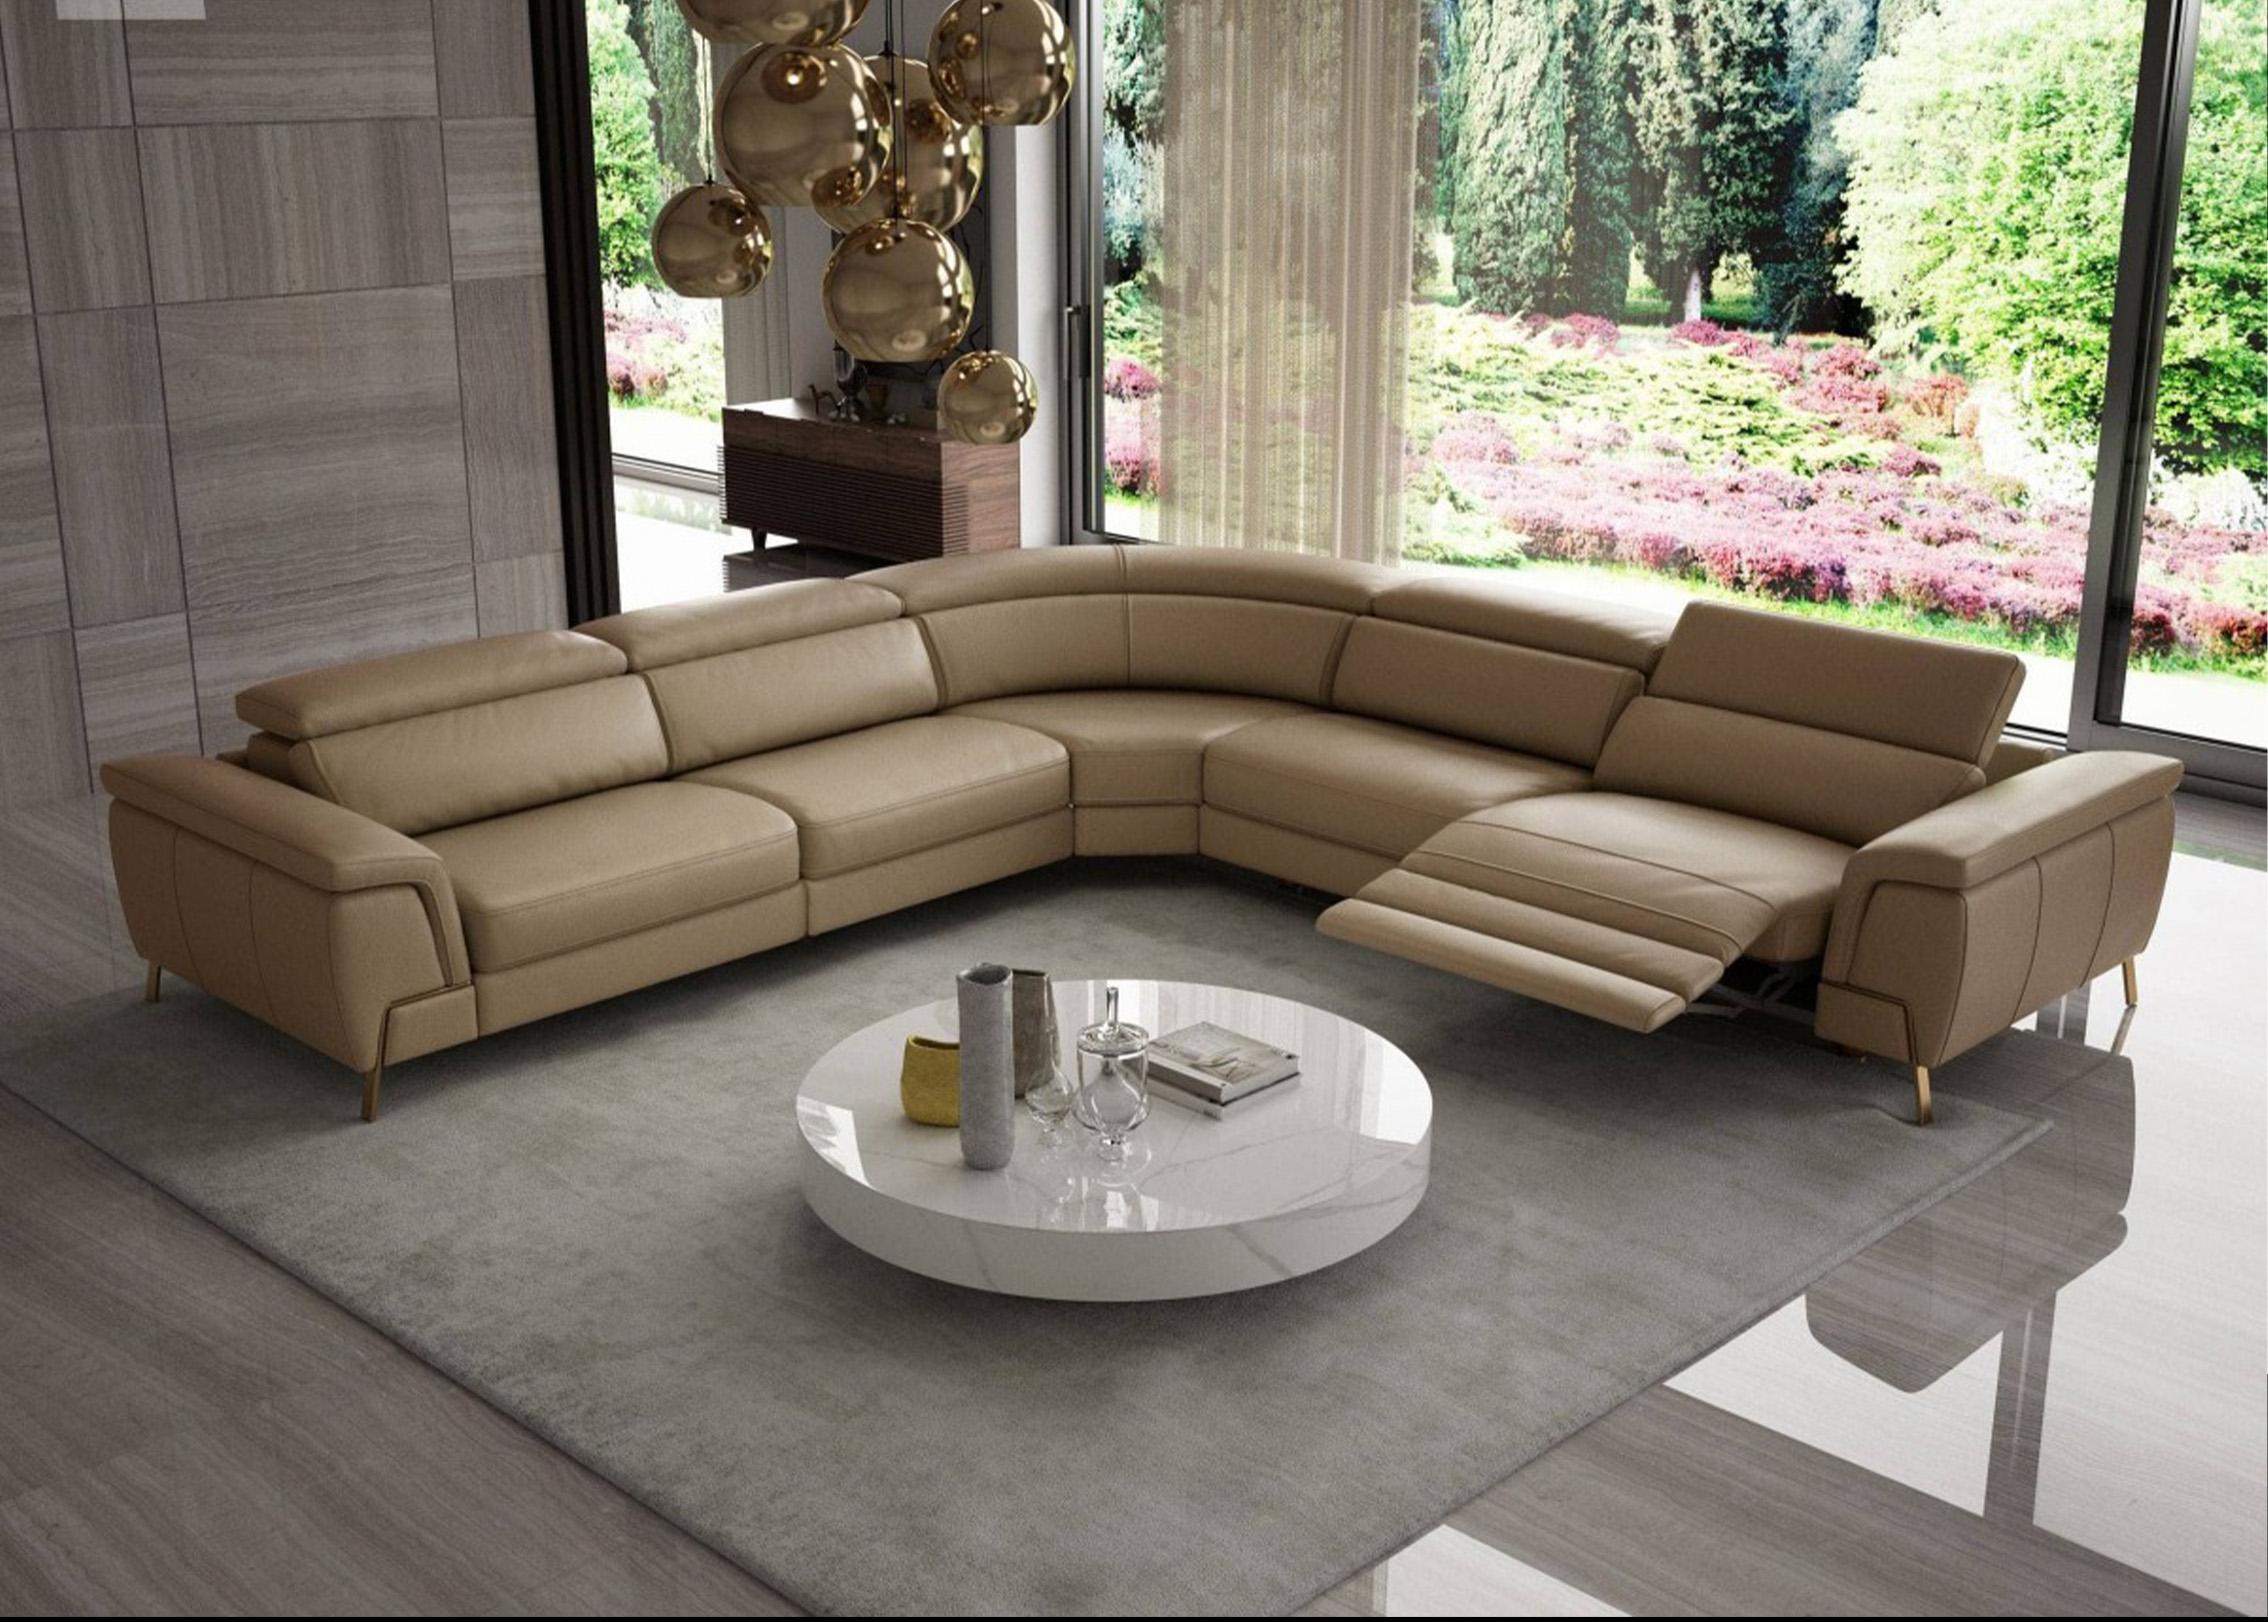 Contemporary, Modern Sectional Recliner VGCCVIOLA-KIM-COG-LAF-SECT VGCCWONDER-BEI-SECT in Tan Italian Leather